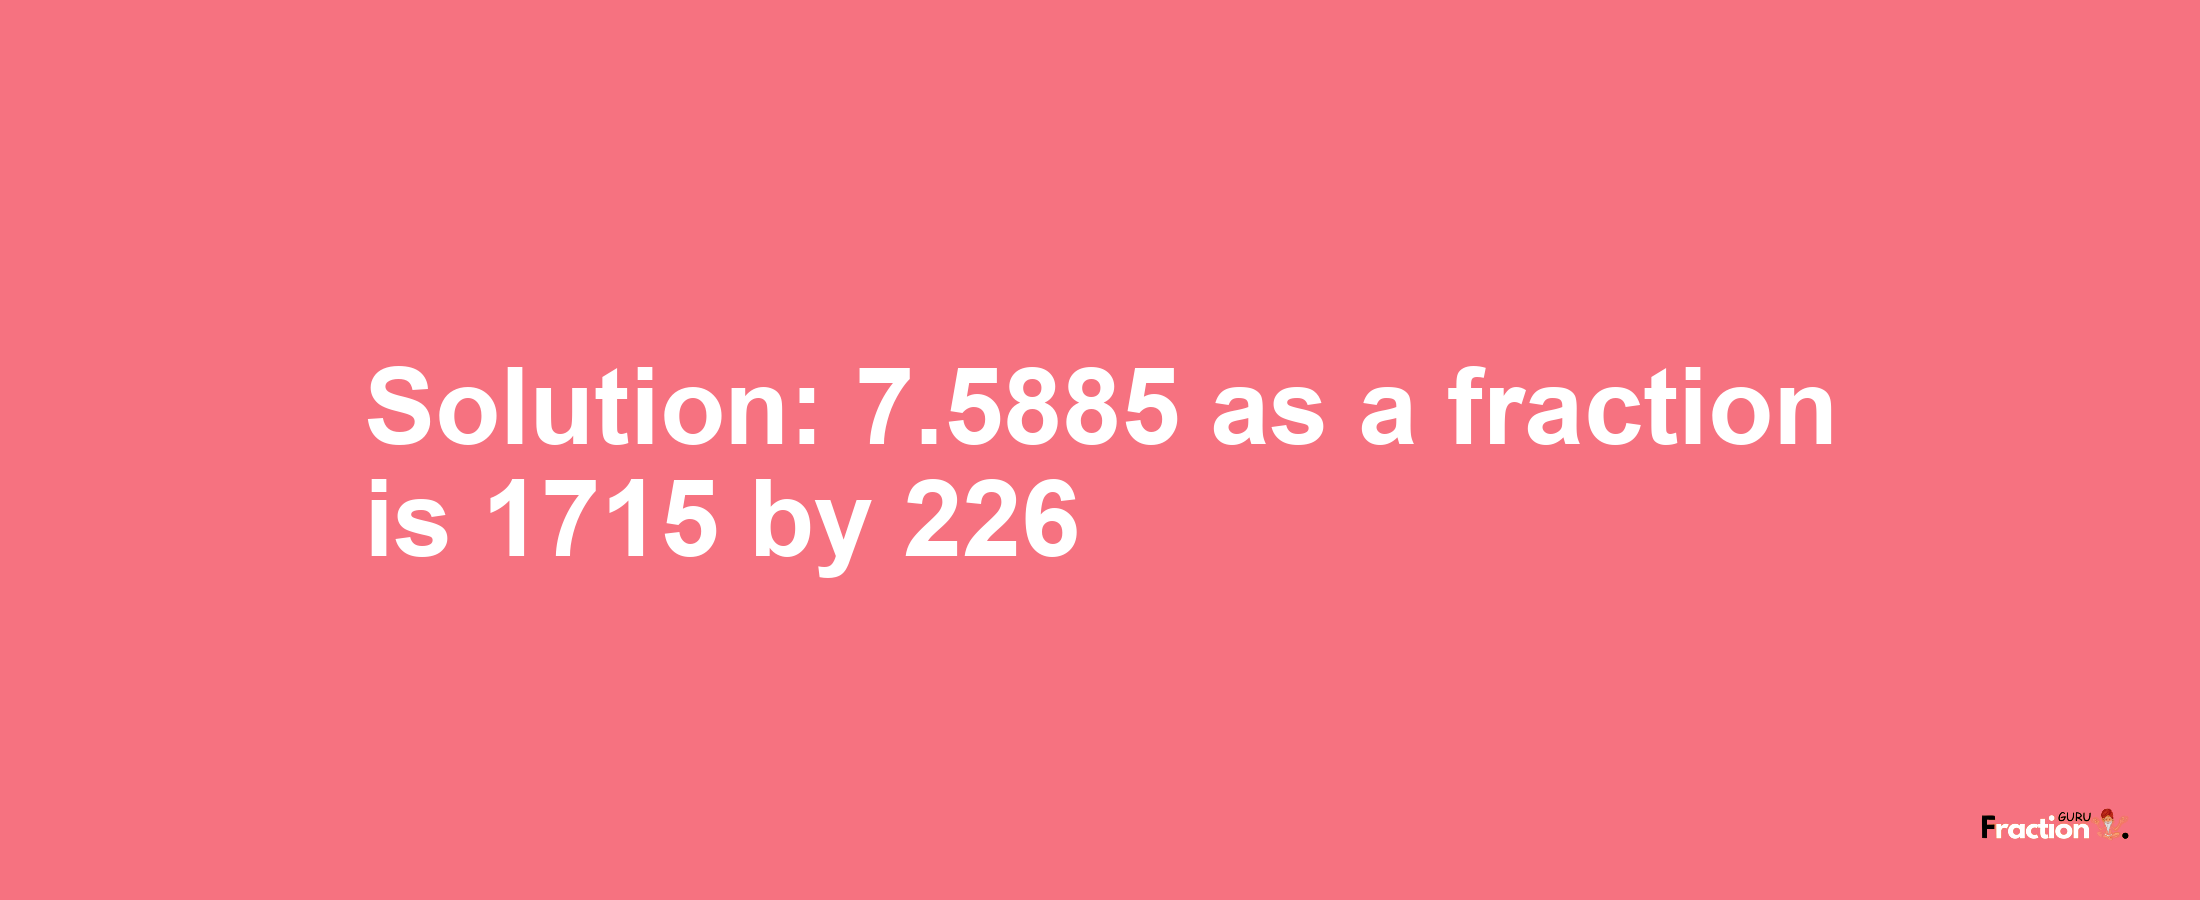 Solution:7.5885 as a fraction is 1715/226